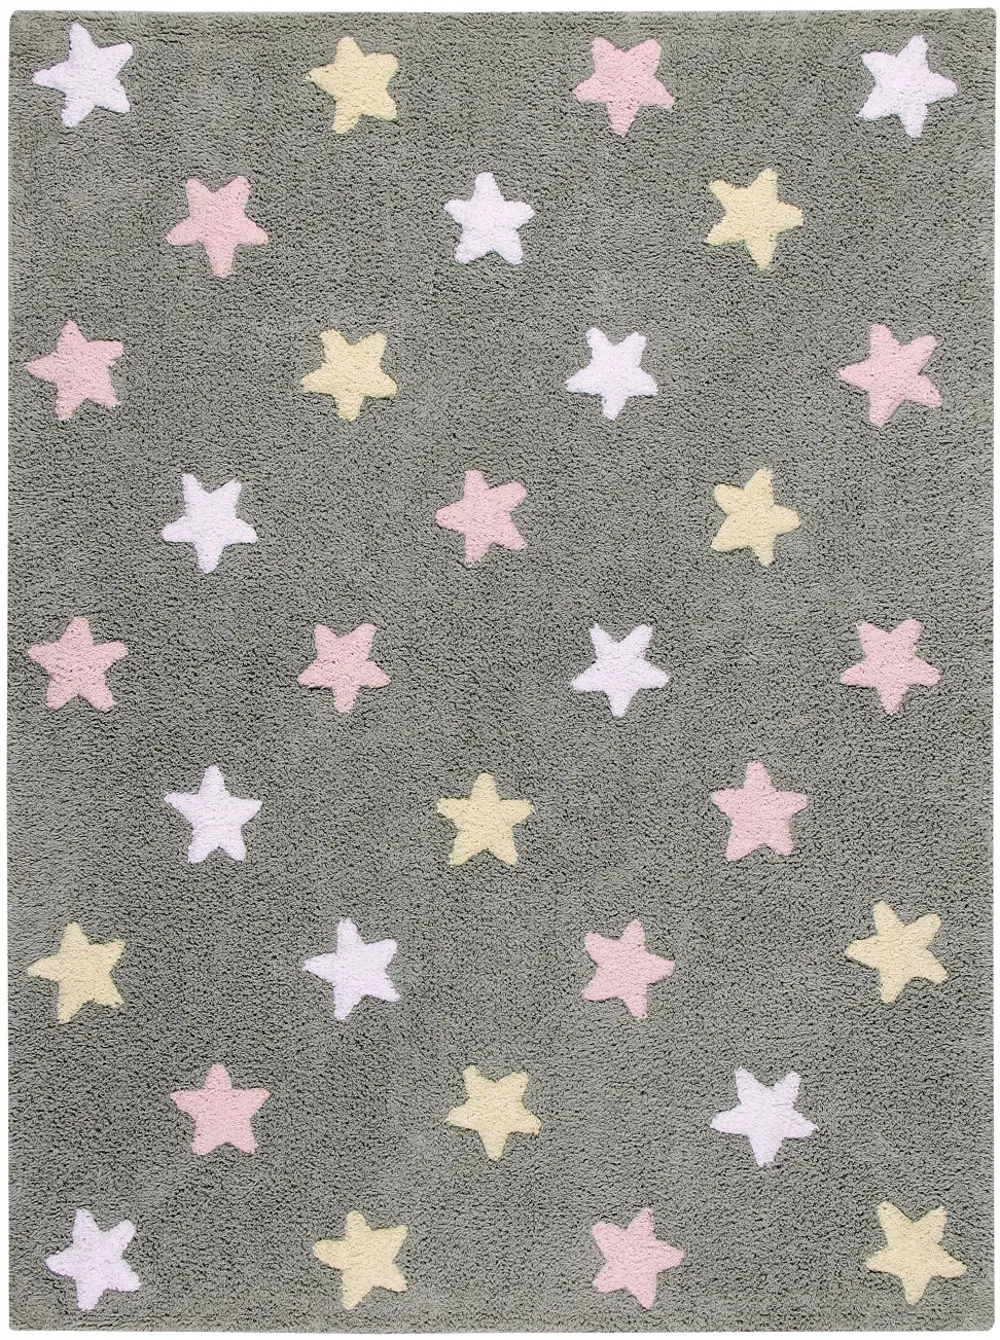 C-ST-P 4 x 5 Small Tricolor Stars Gray and Pink Washable Rug-1